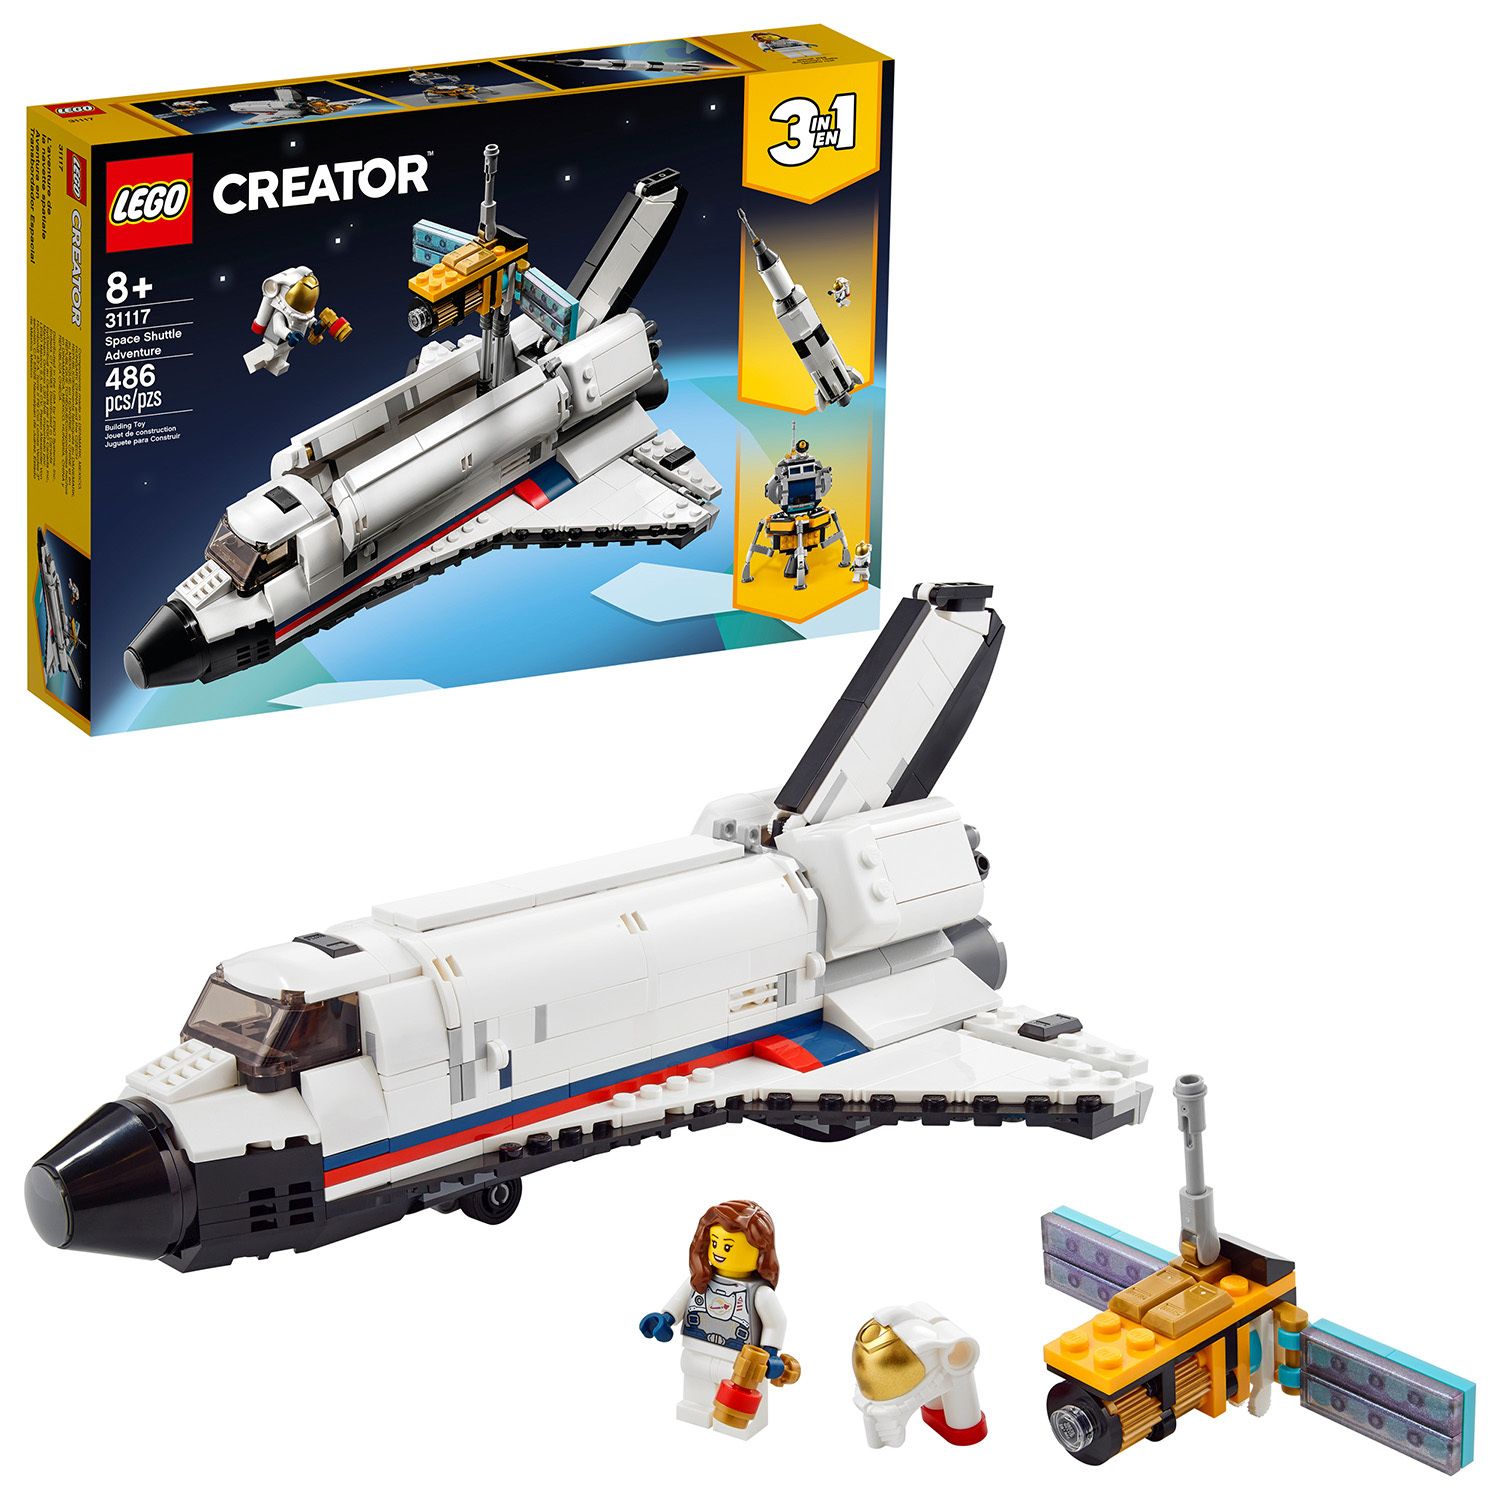 Image for LEGO Creator 3-in-1 Space Shuttle Adventure 31117 Building Kit (486 Pieces) at Kohl's.